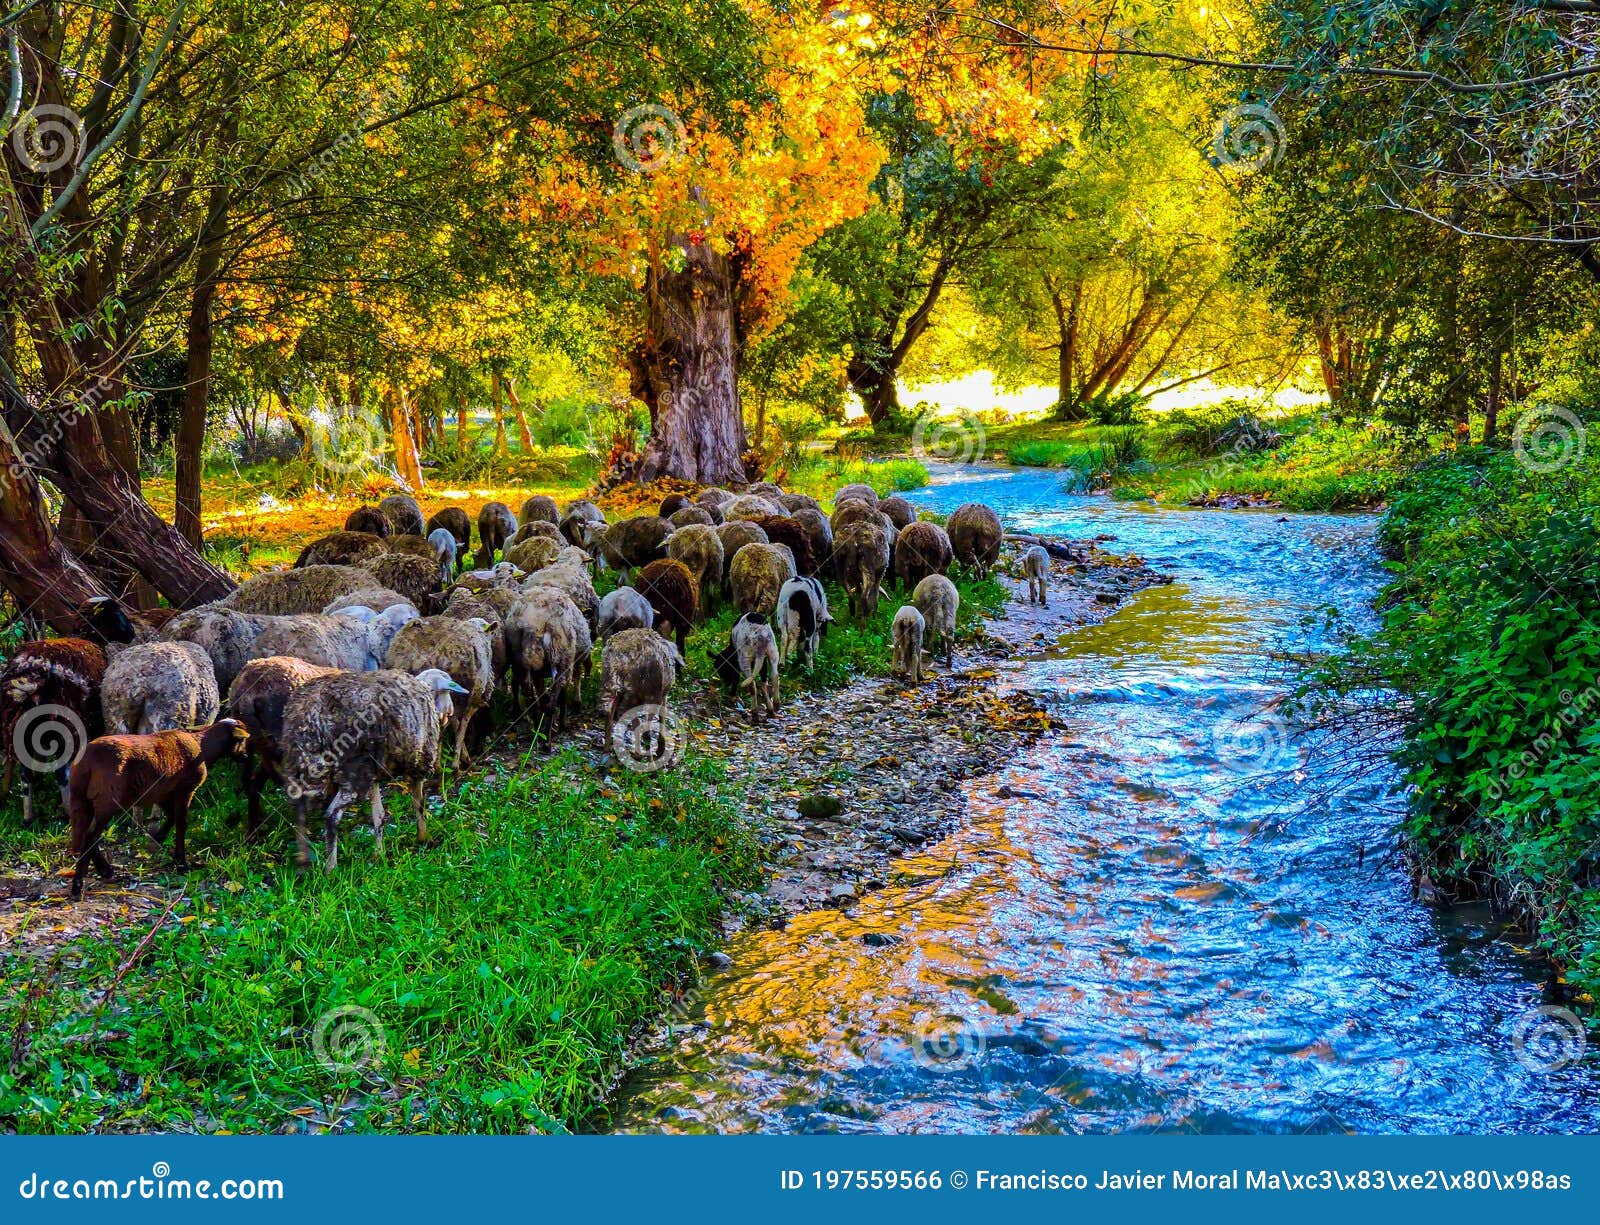 amazing stream with sheep around in a colourful forest